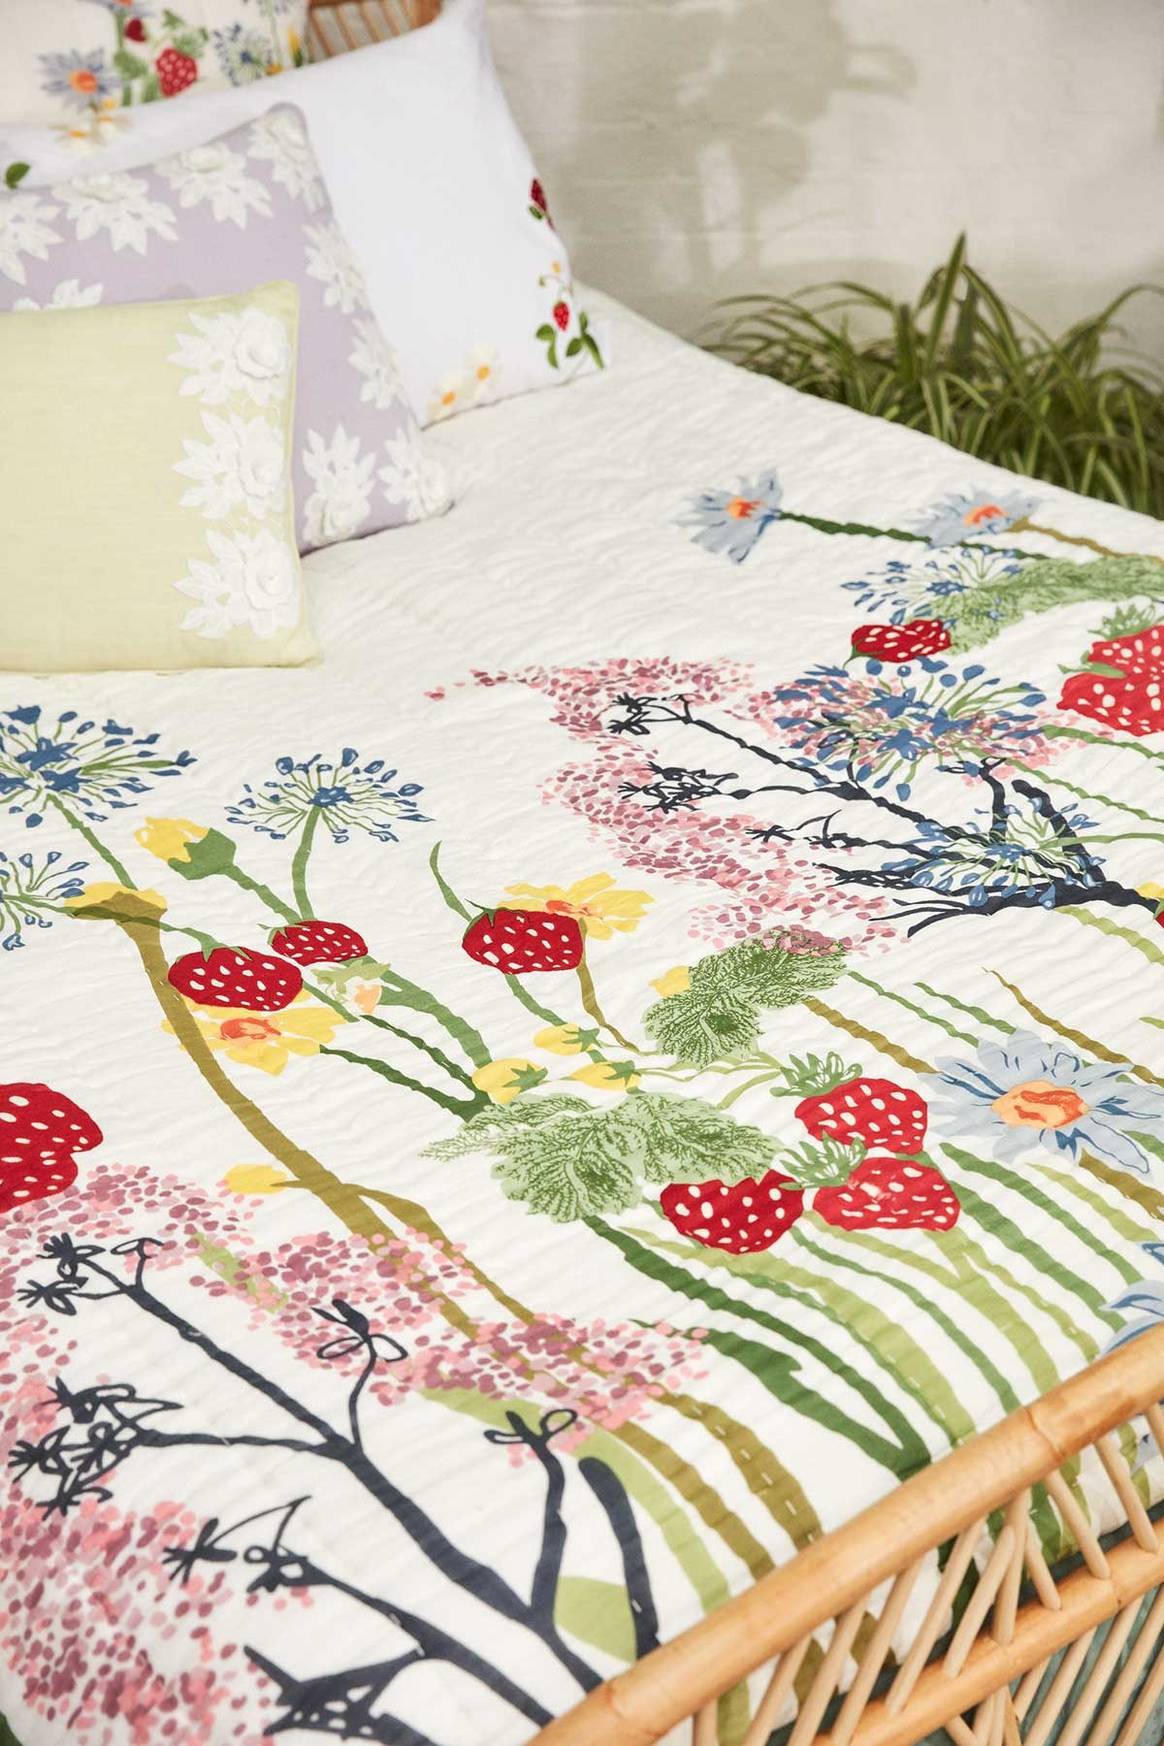 Anthropologie launches Alice Archer collaboration